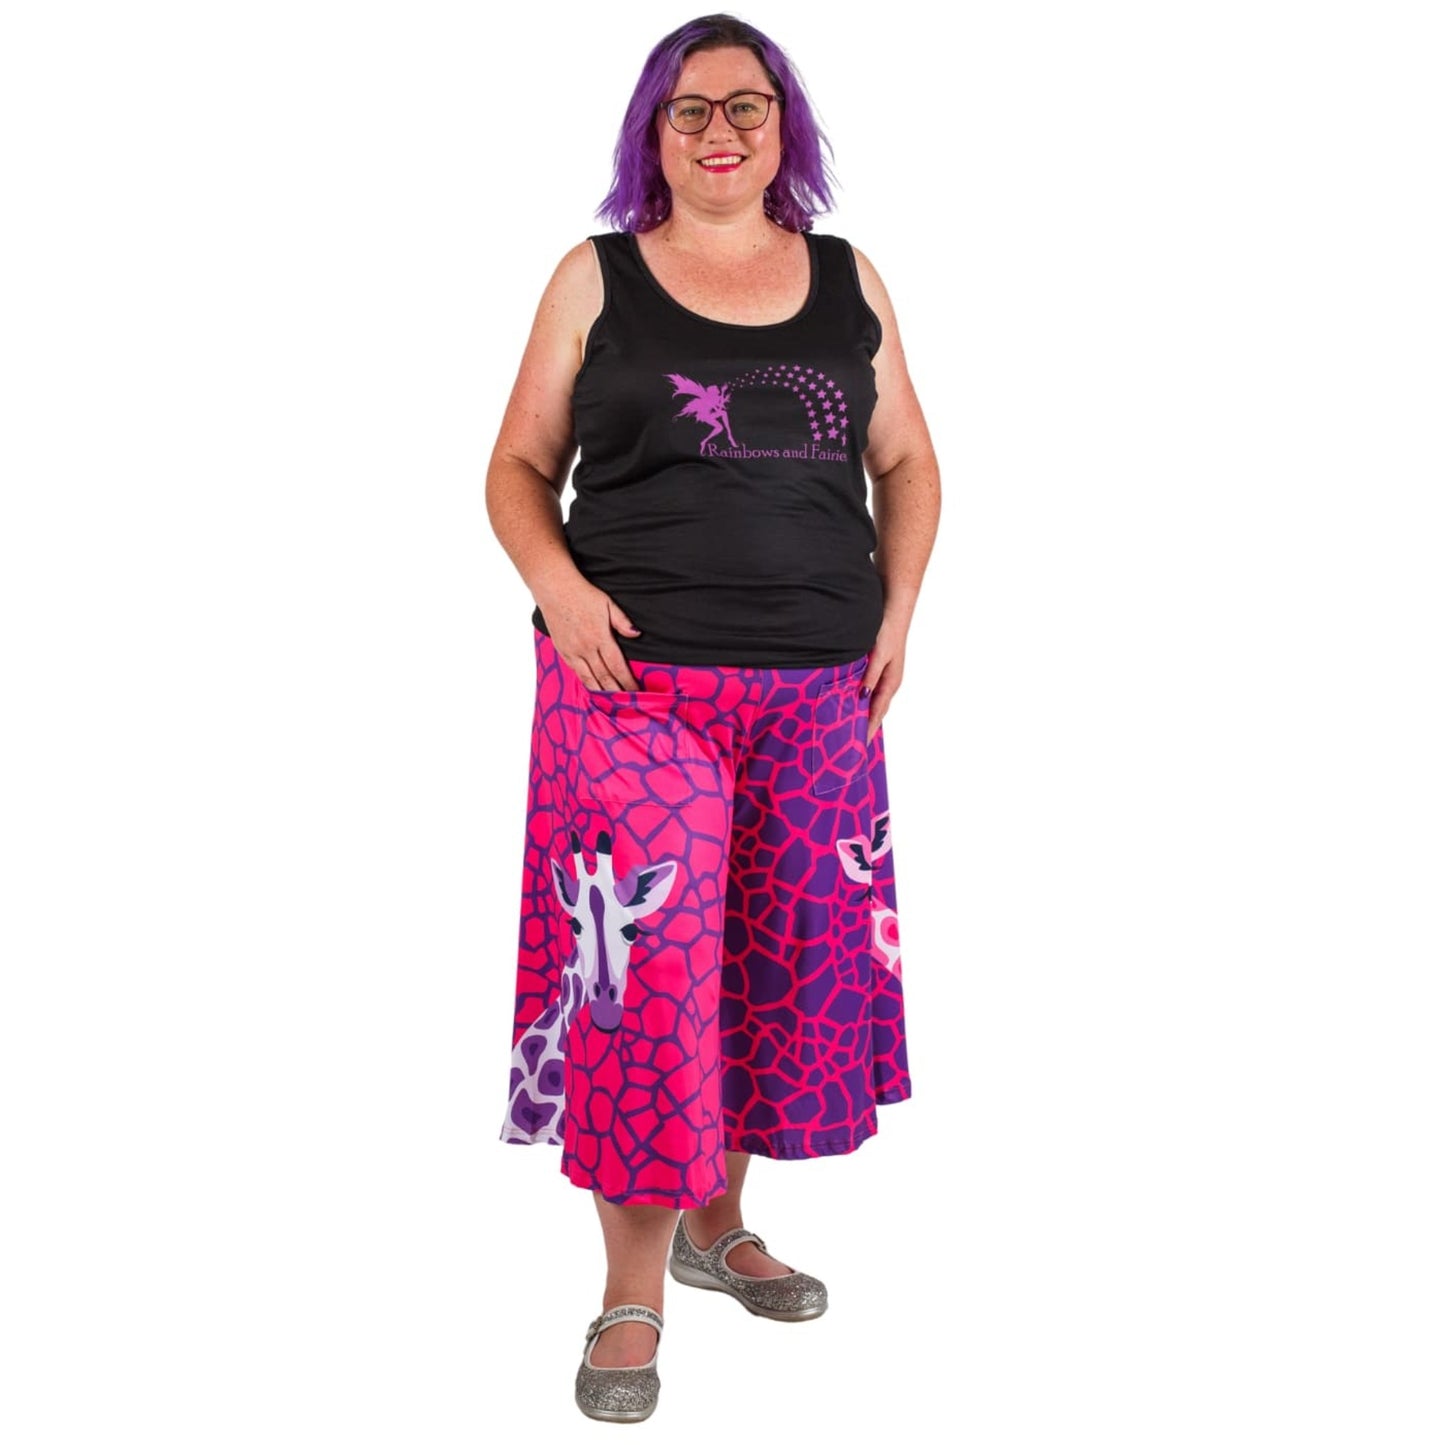 Andy Culottes by RainbowsAndFairies.com (Giraffe - Pink & Purple - Jungle - 3 Quarter Pants - Rockabilly - Vintage Inspired) - SKU: CL_CULTS_ANDYG_PNK - Pic 04